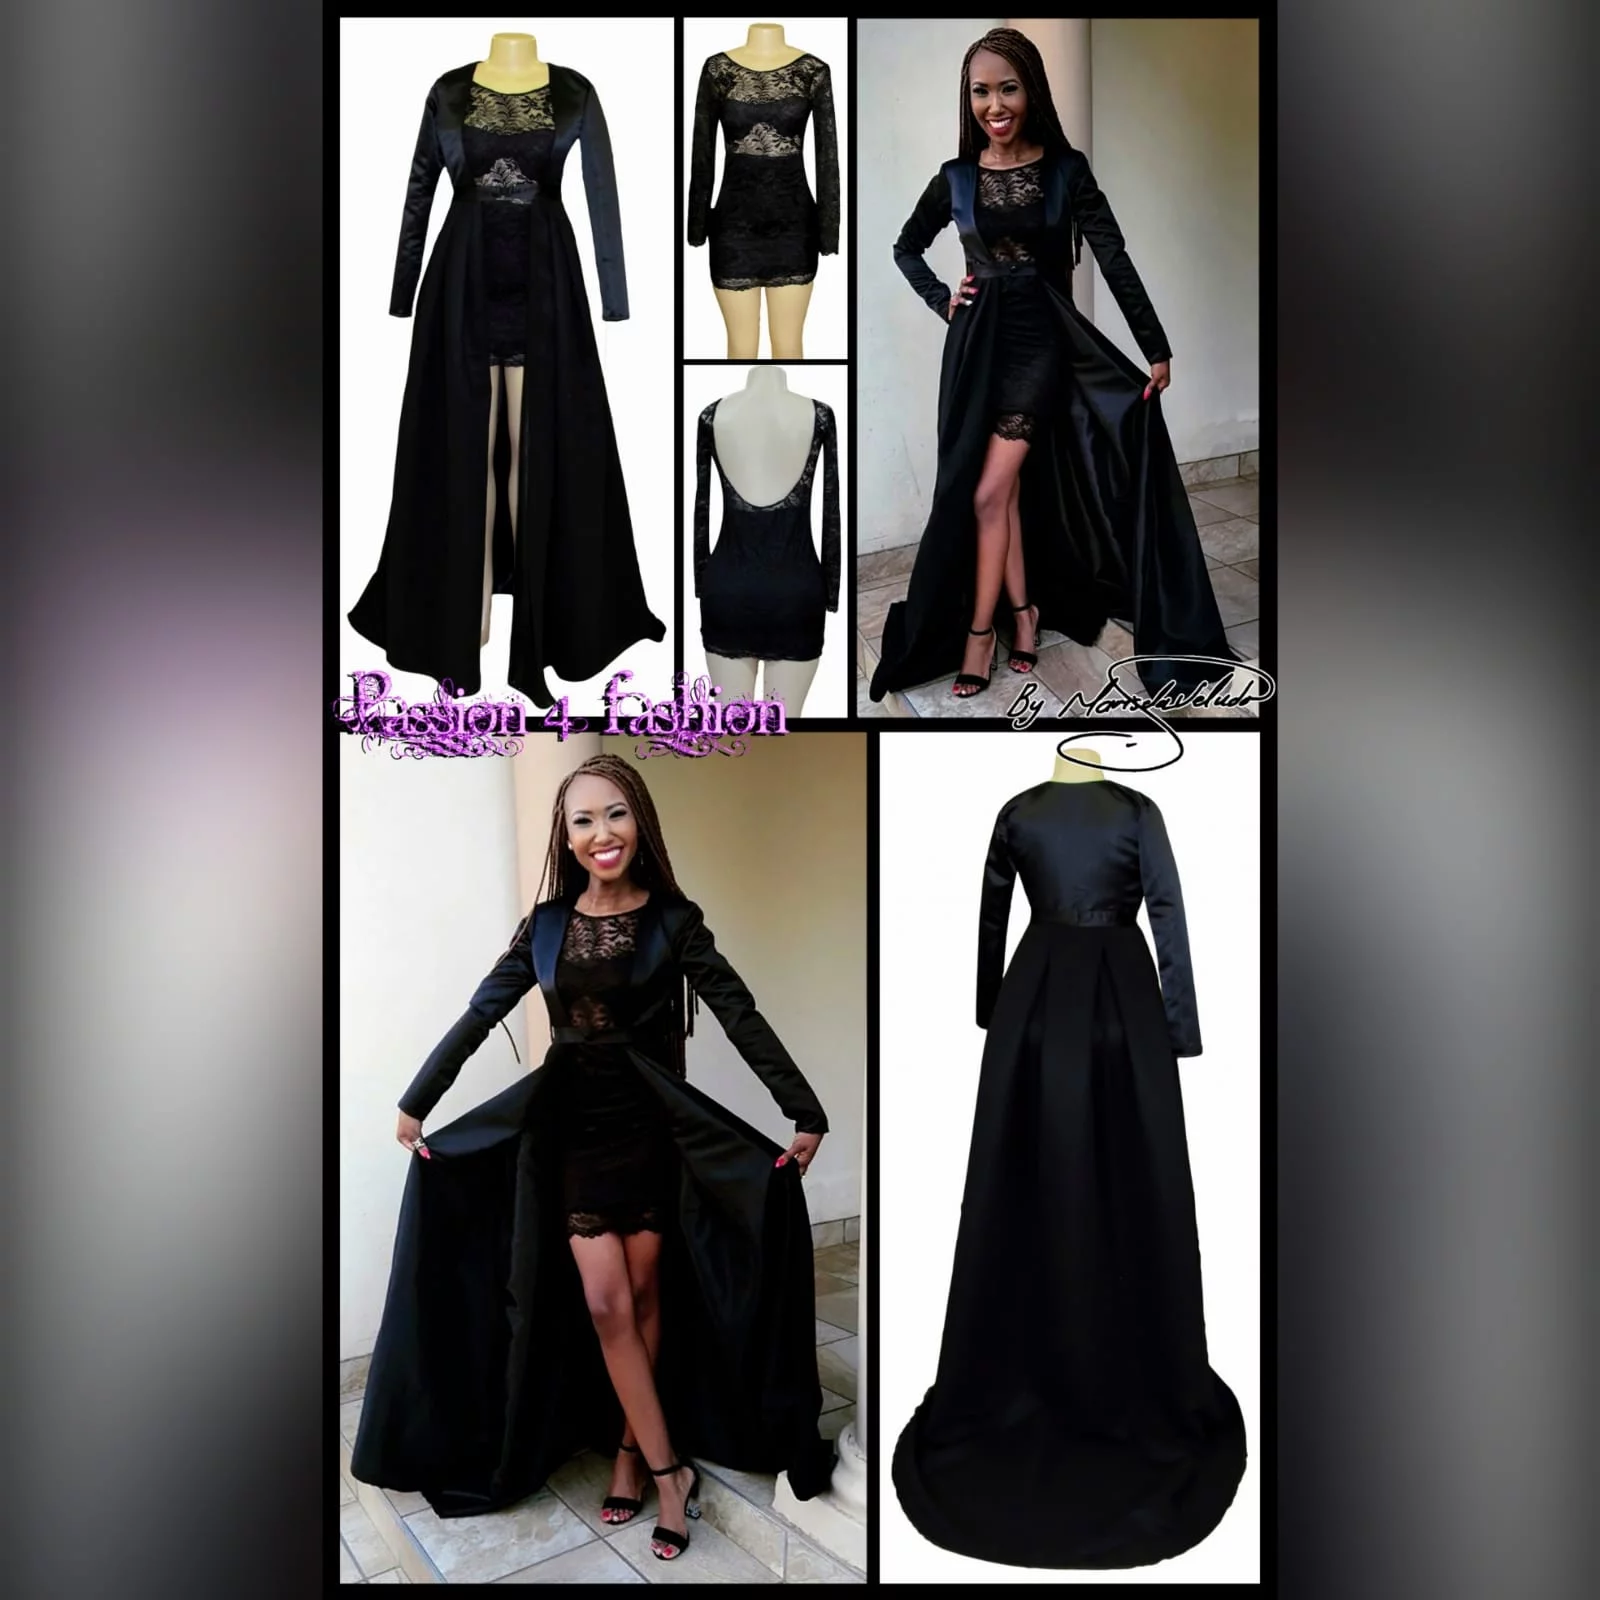 2 piece black lace mini prom dress and coat 6 2 piece black lace mini prom dress and coat. Dress with rounded open back and a sheer lace bodice.